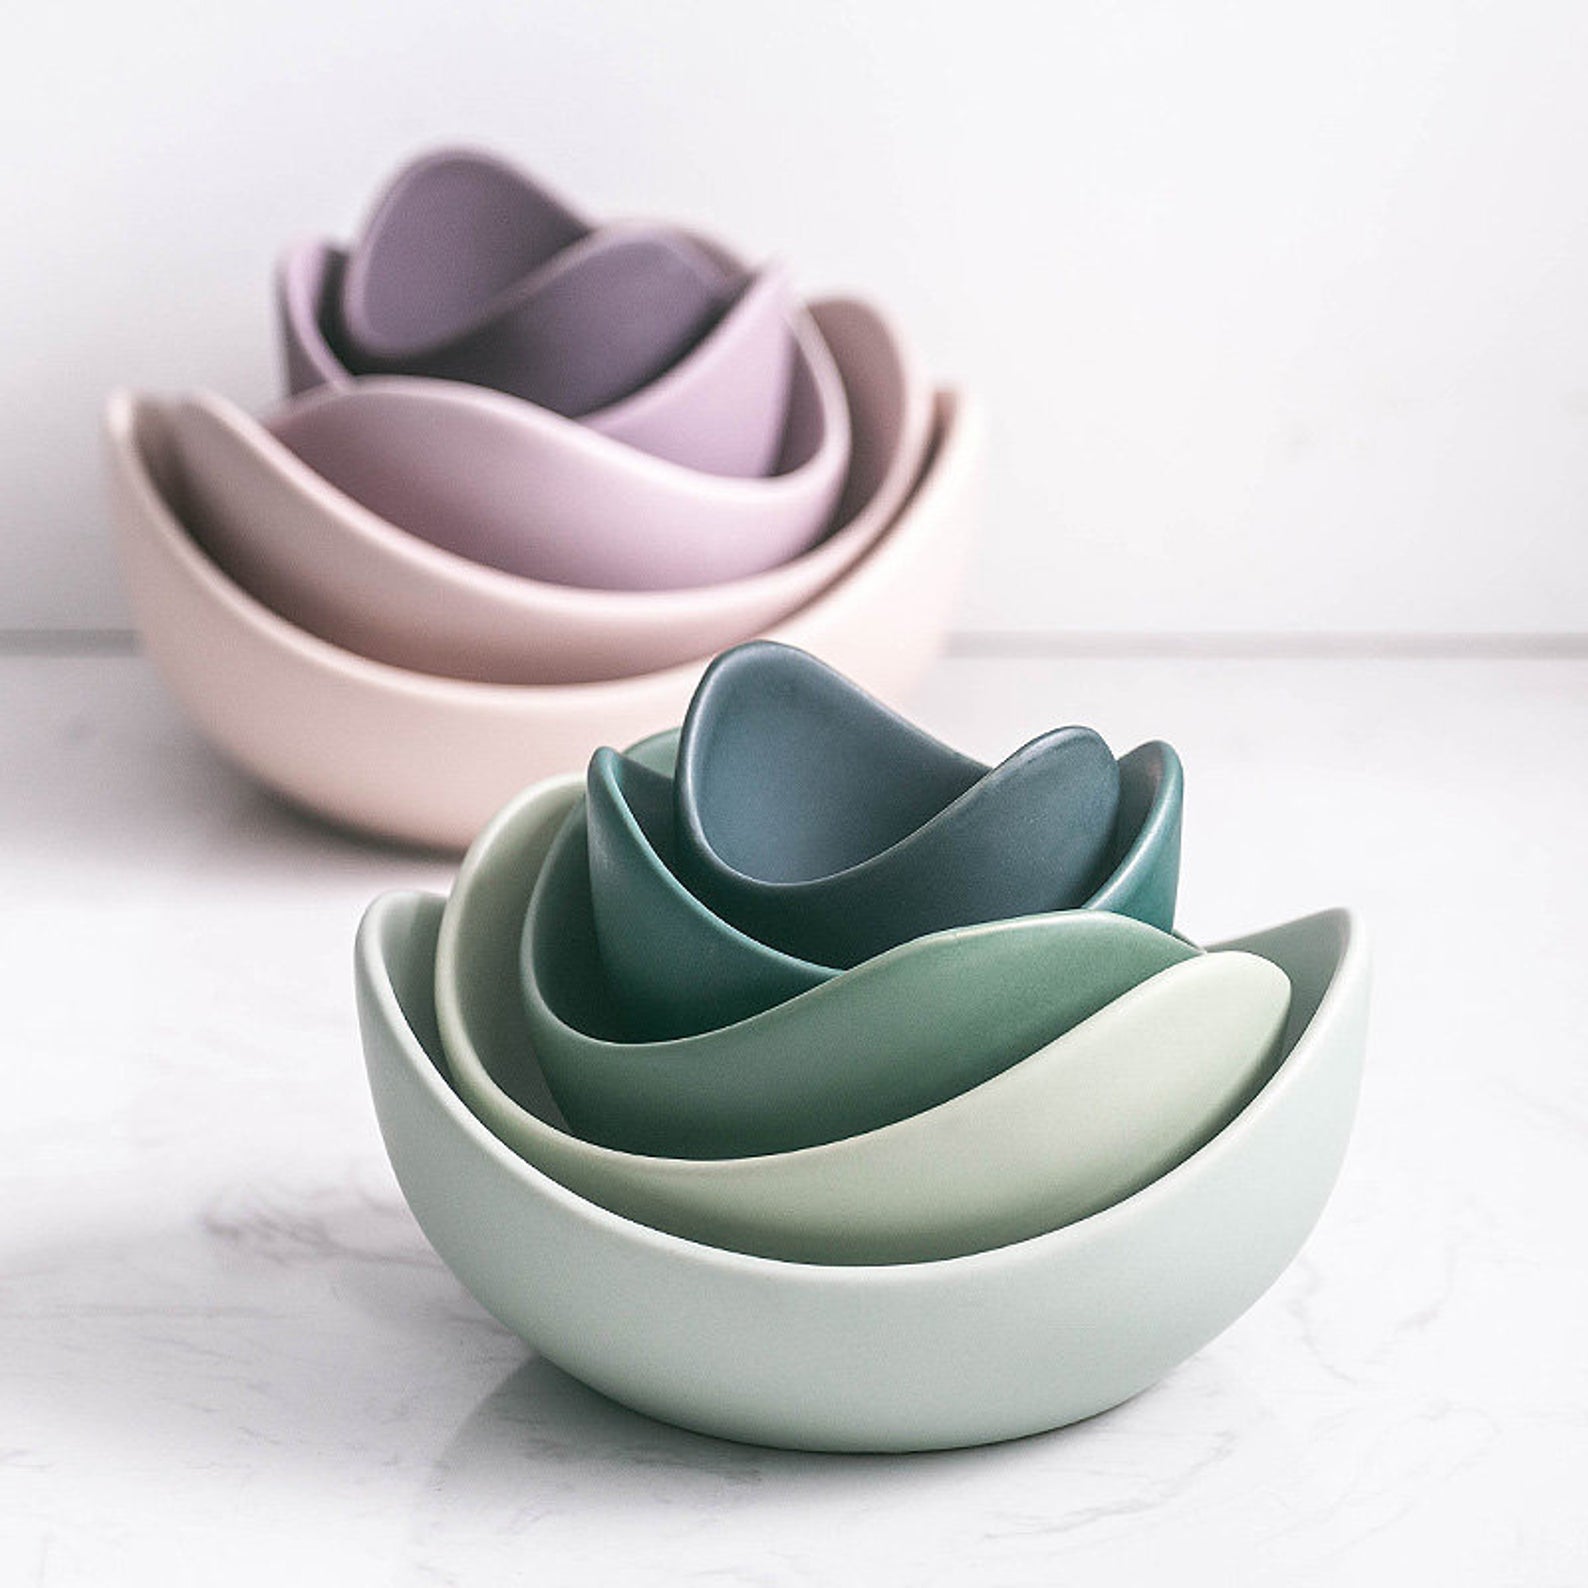 Sets of matte purple and teal nesting bowls